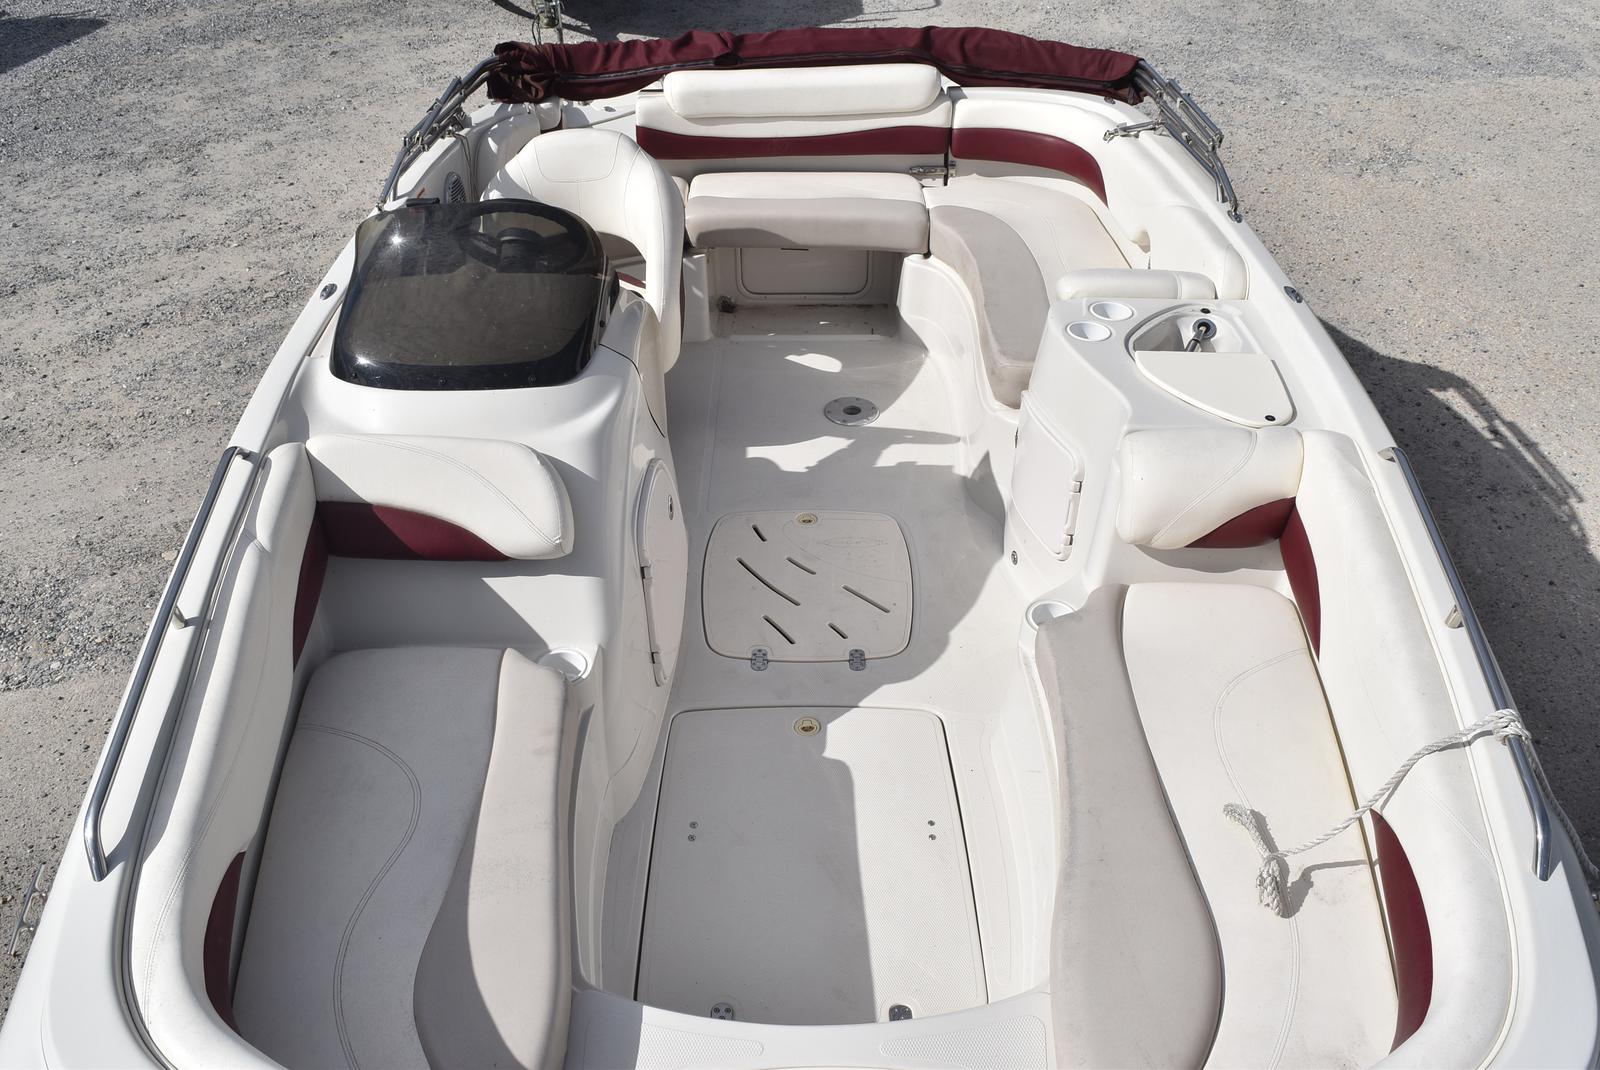 2008 Tahoe boat for sale, model of the boat is 215 & Image # 8 of 20